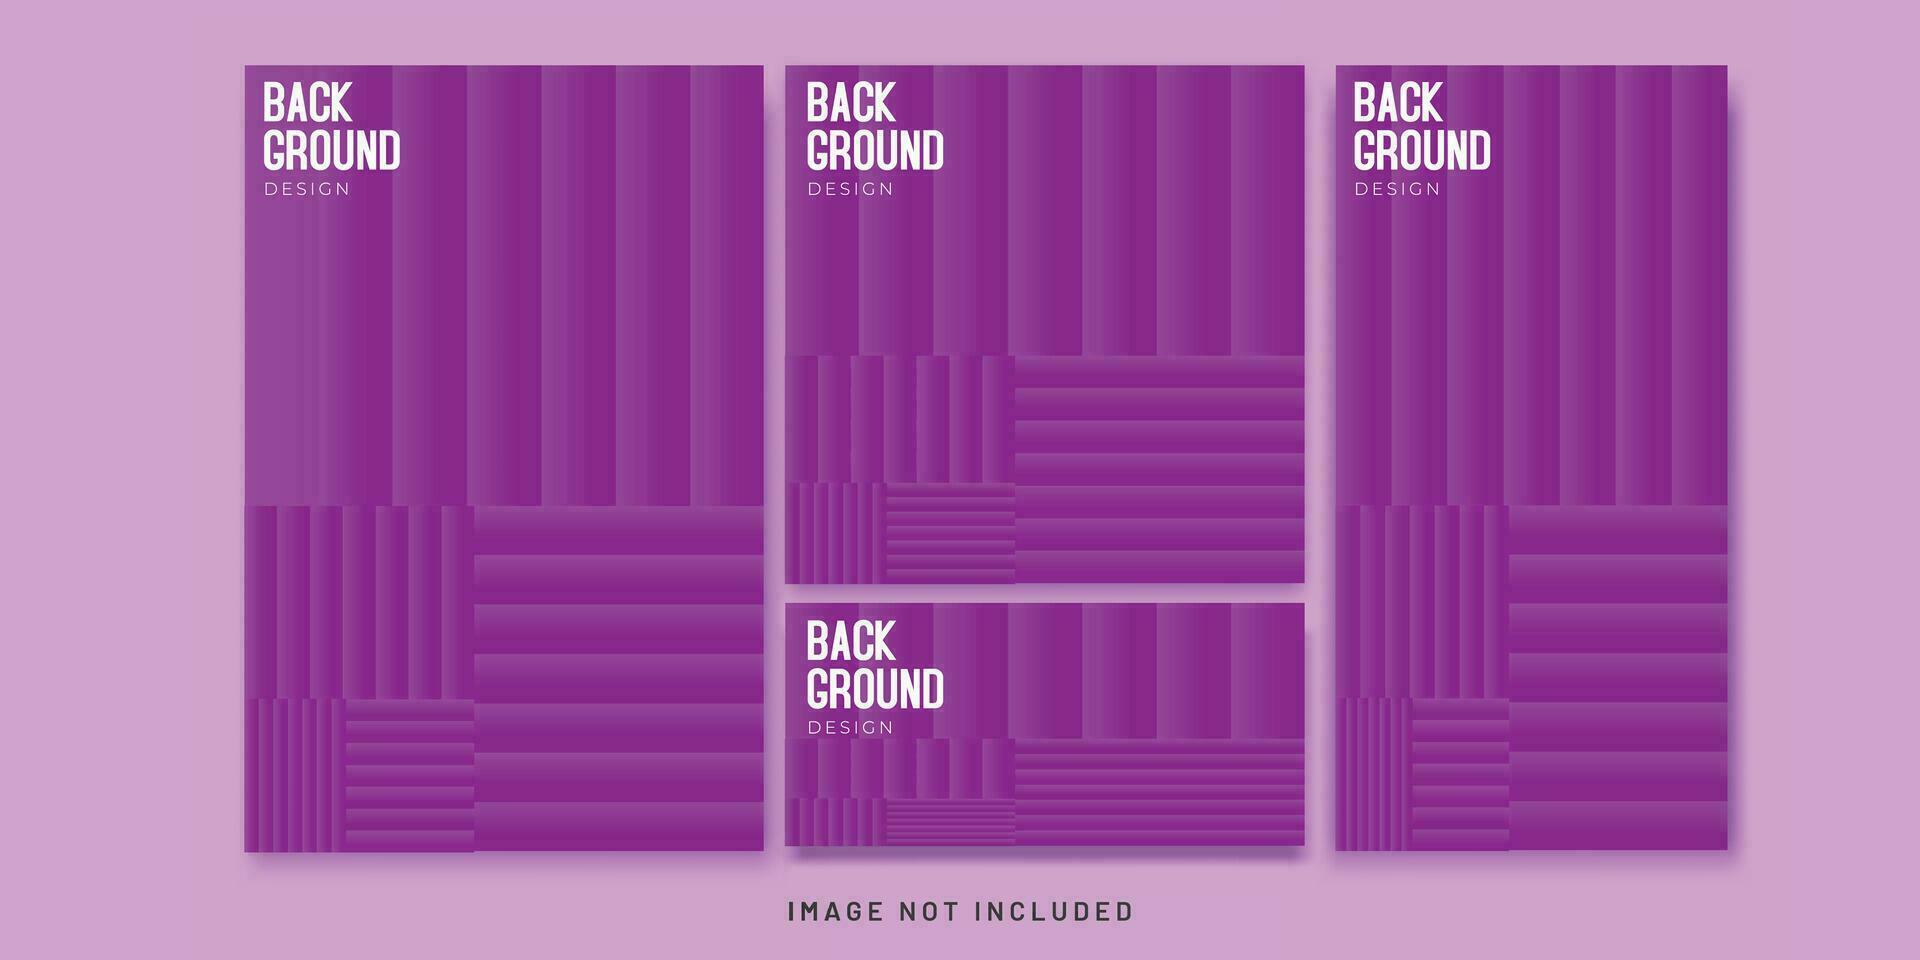 Background Gradient Abstract Geometric Flyer and Social media Bundle Set vector